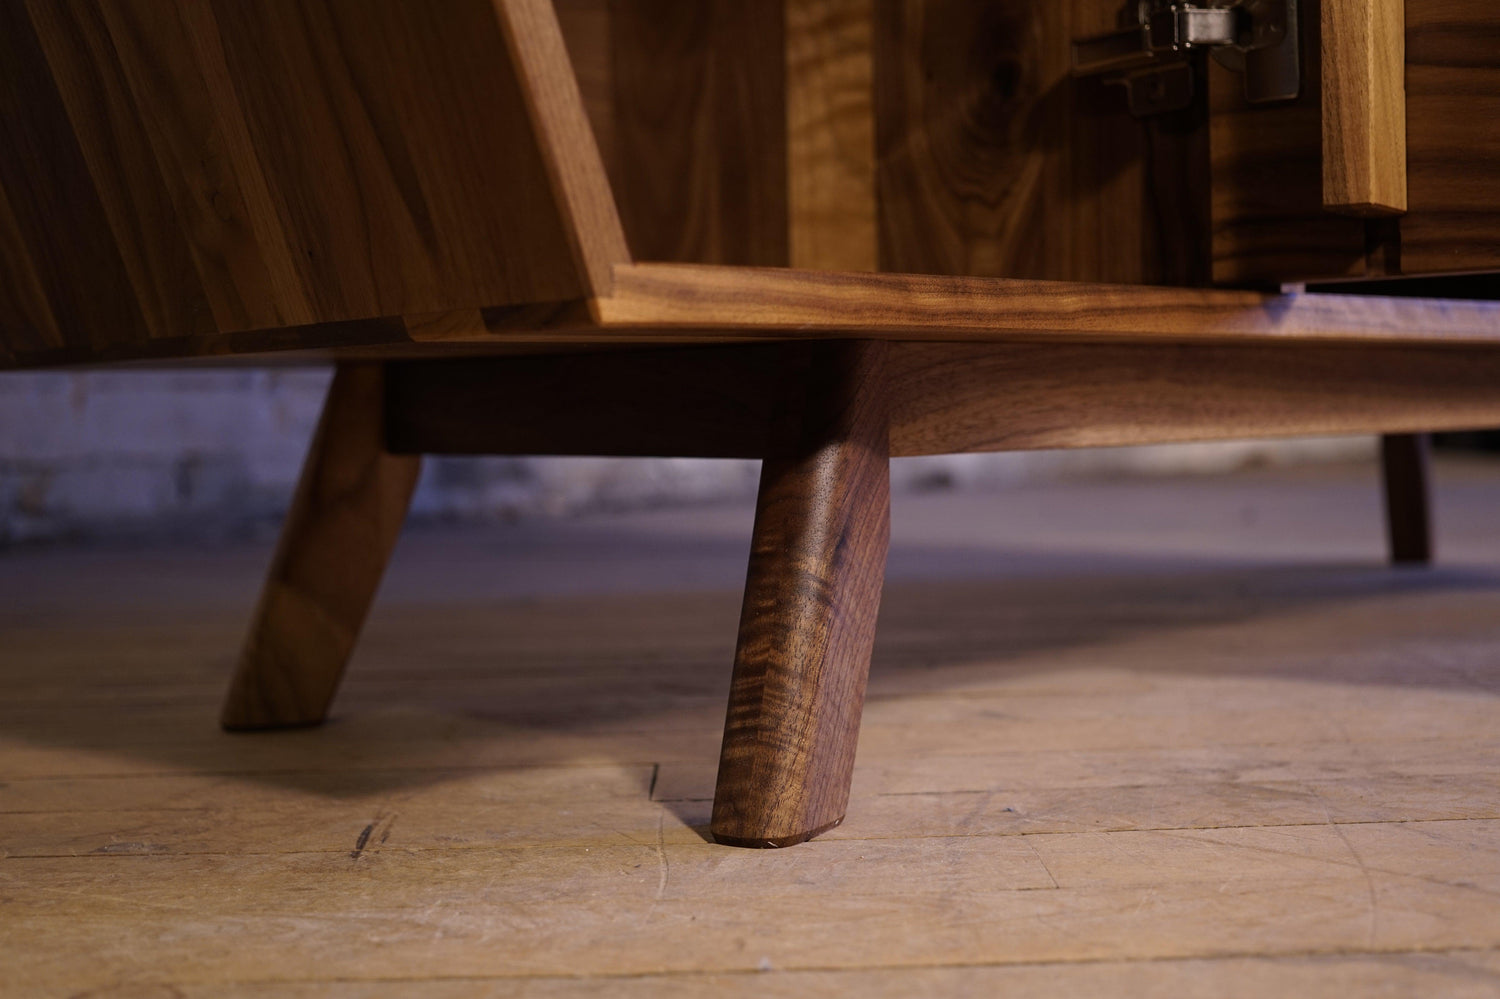 A close up of the mid-century modern style feet of a custom walnut cabinet.